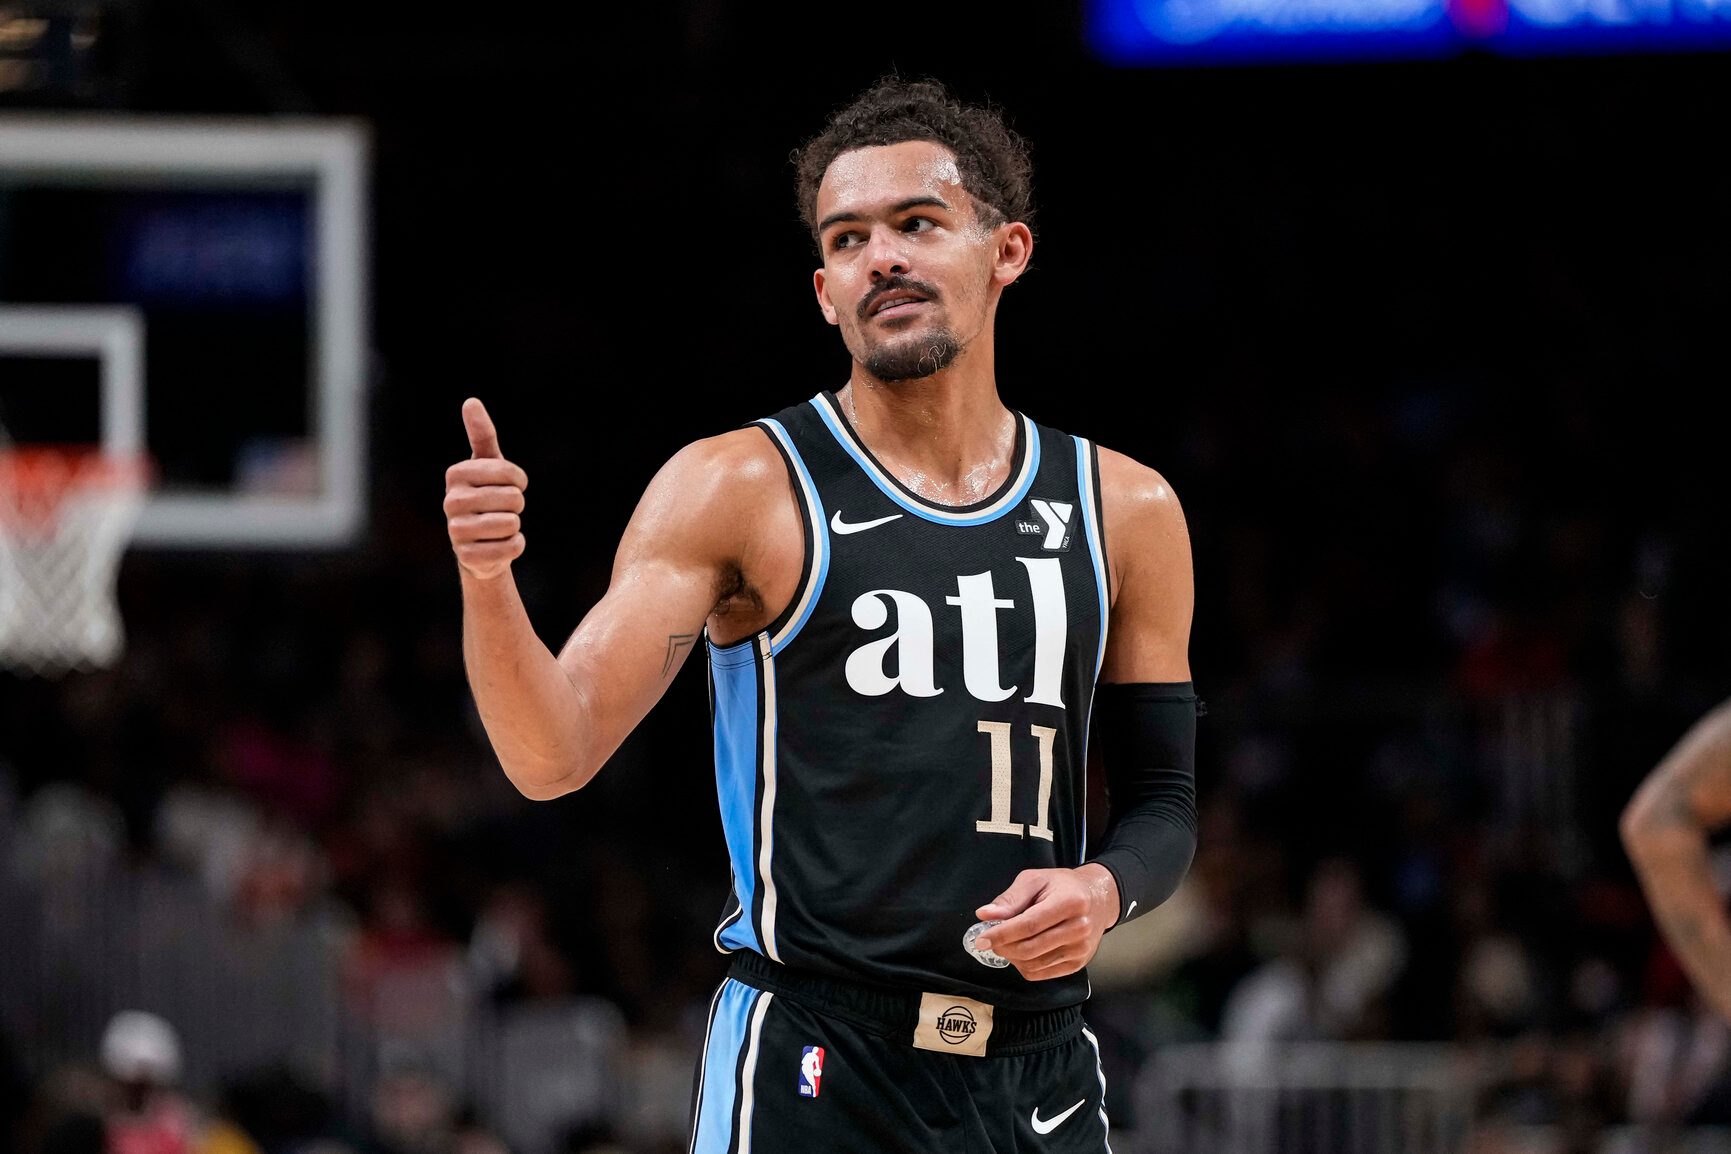 Hawks star Trae Young fined $35,000 for gesture